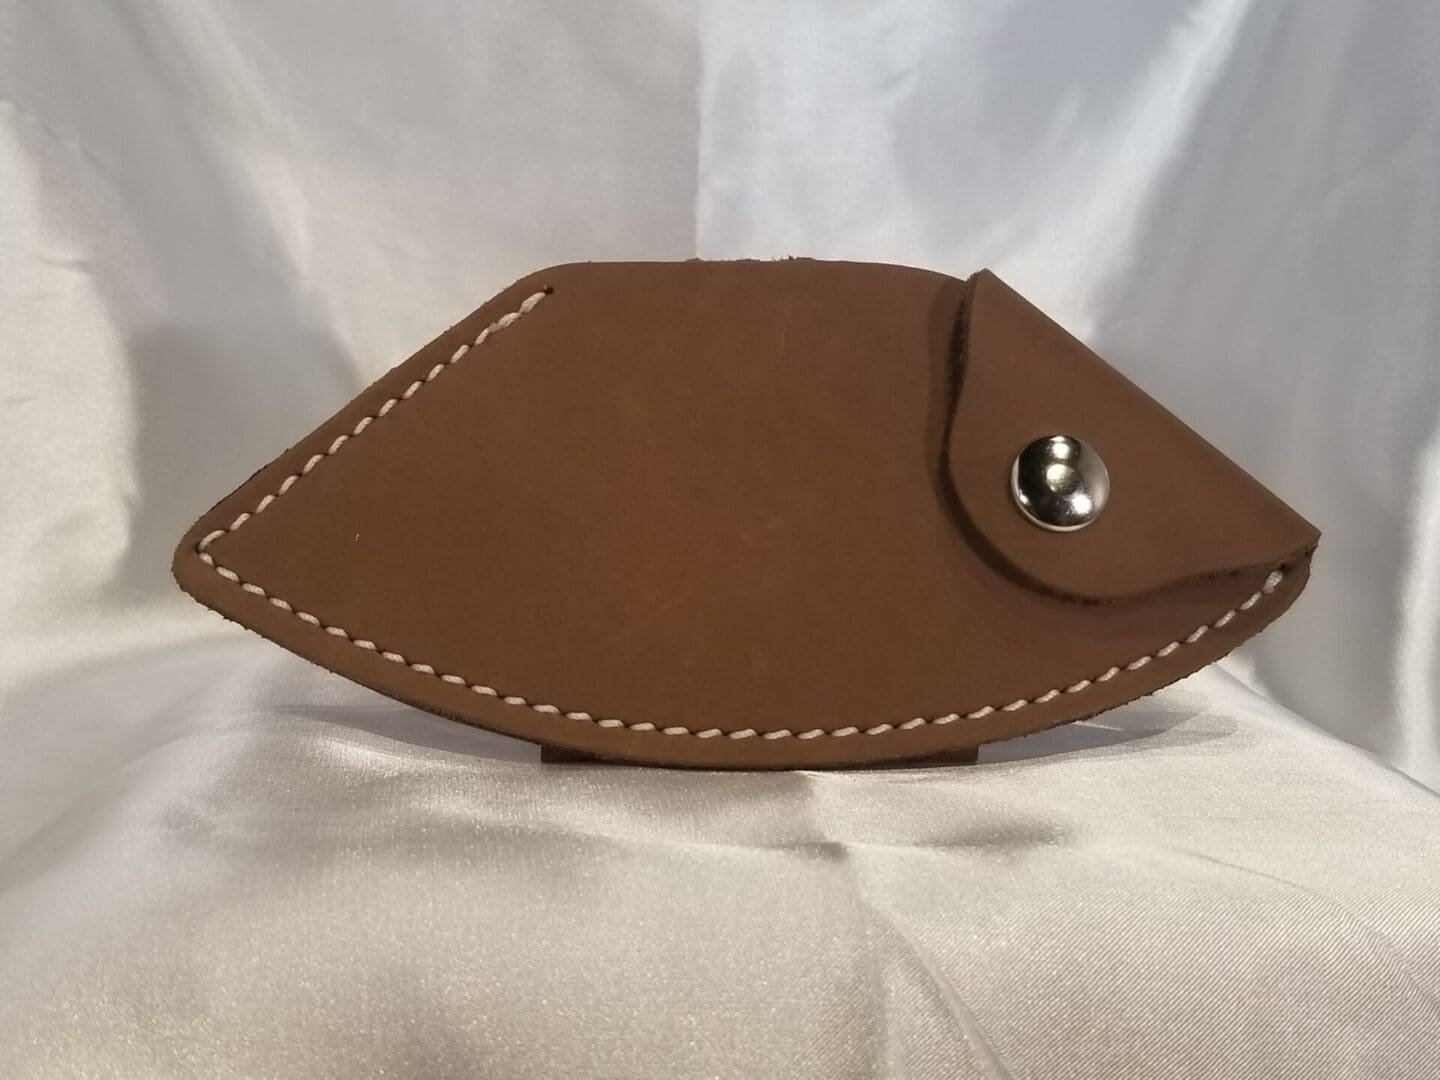 A brown leather case with a fish design.